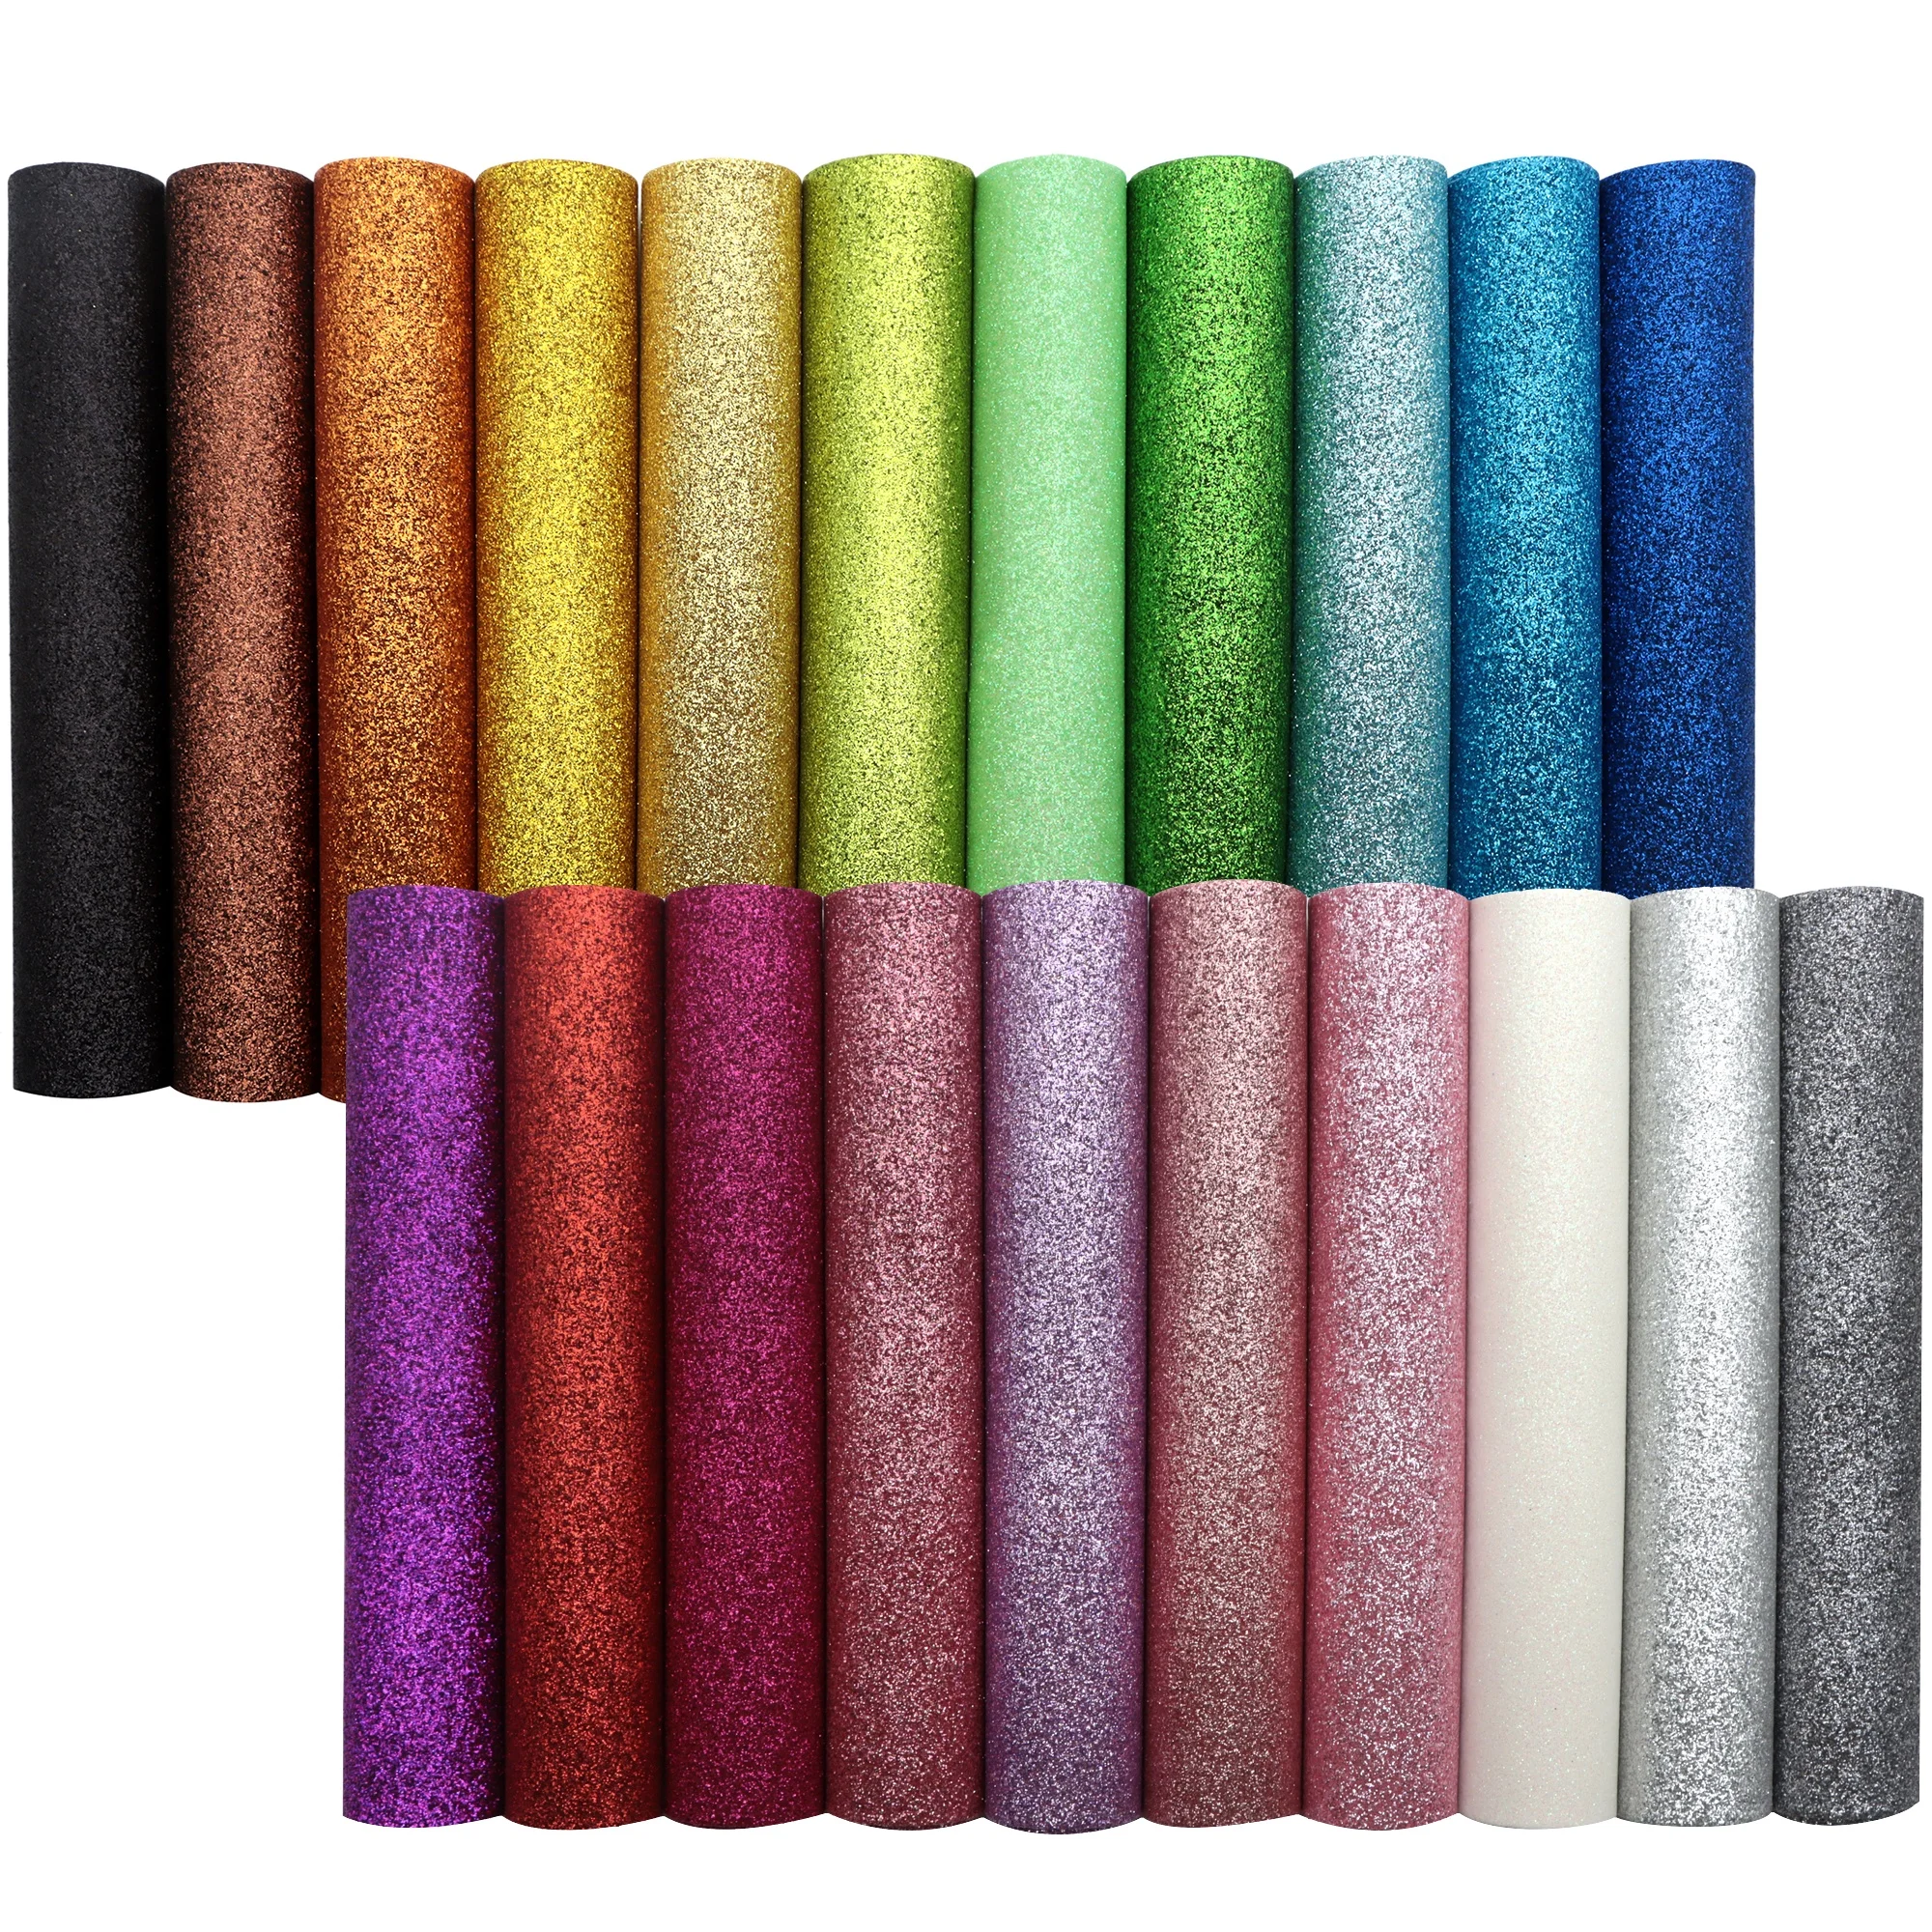 20x34cm Bulk Plain Color Superfine Glitter pvc Faux Synthetic Leather Fabric Sheet For Hair Bows Making 54204